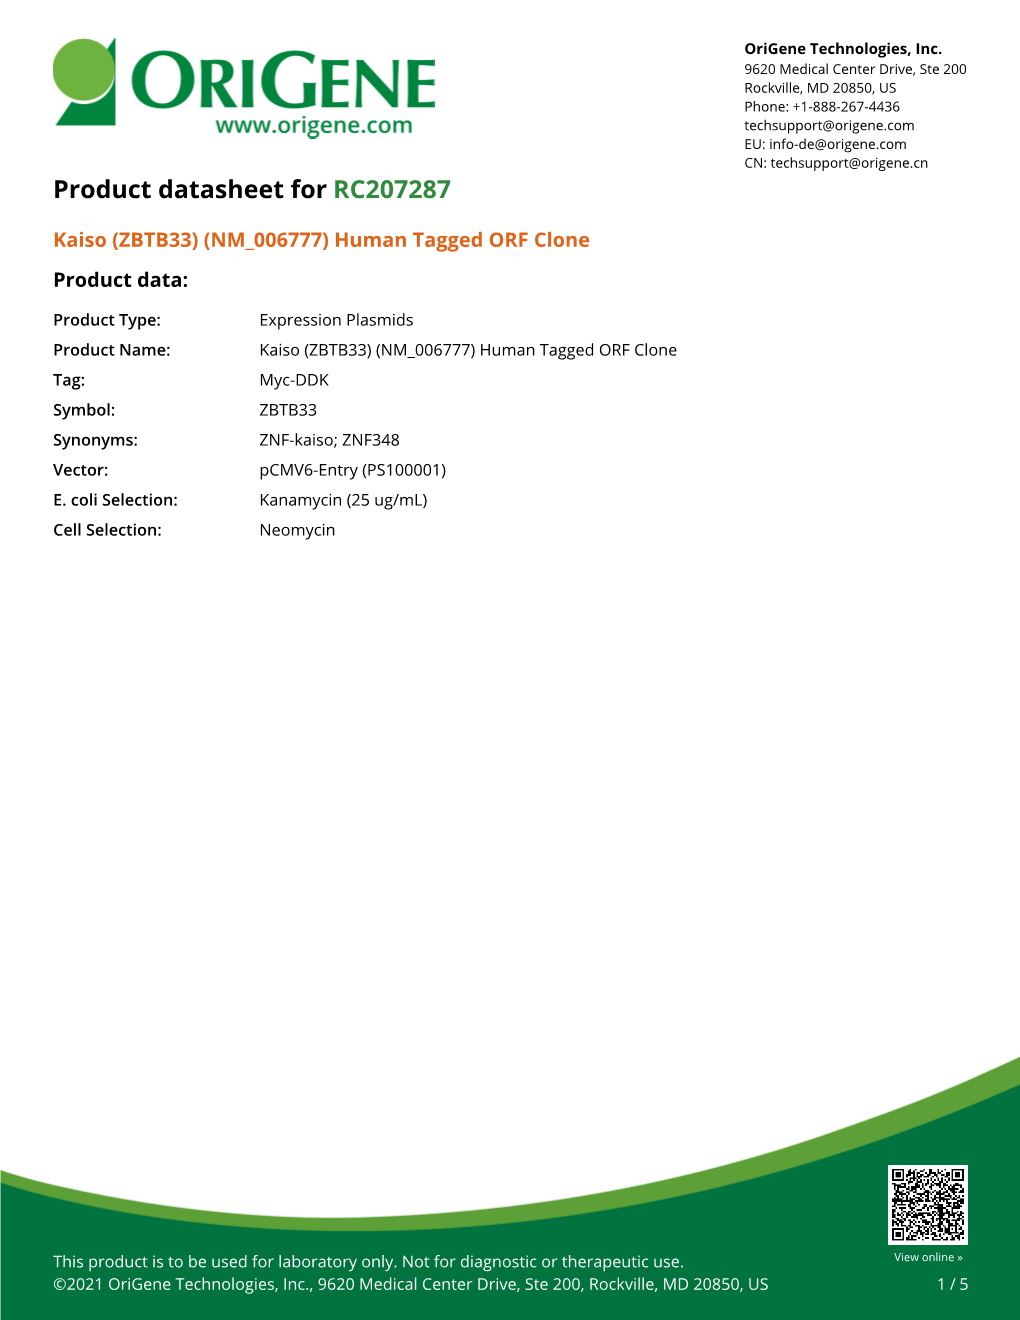 Kaiso (ZBTB33) (NM 006777) Human Tagged ORF Clone Product Data